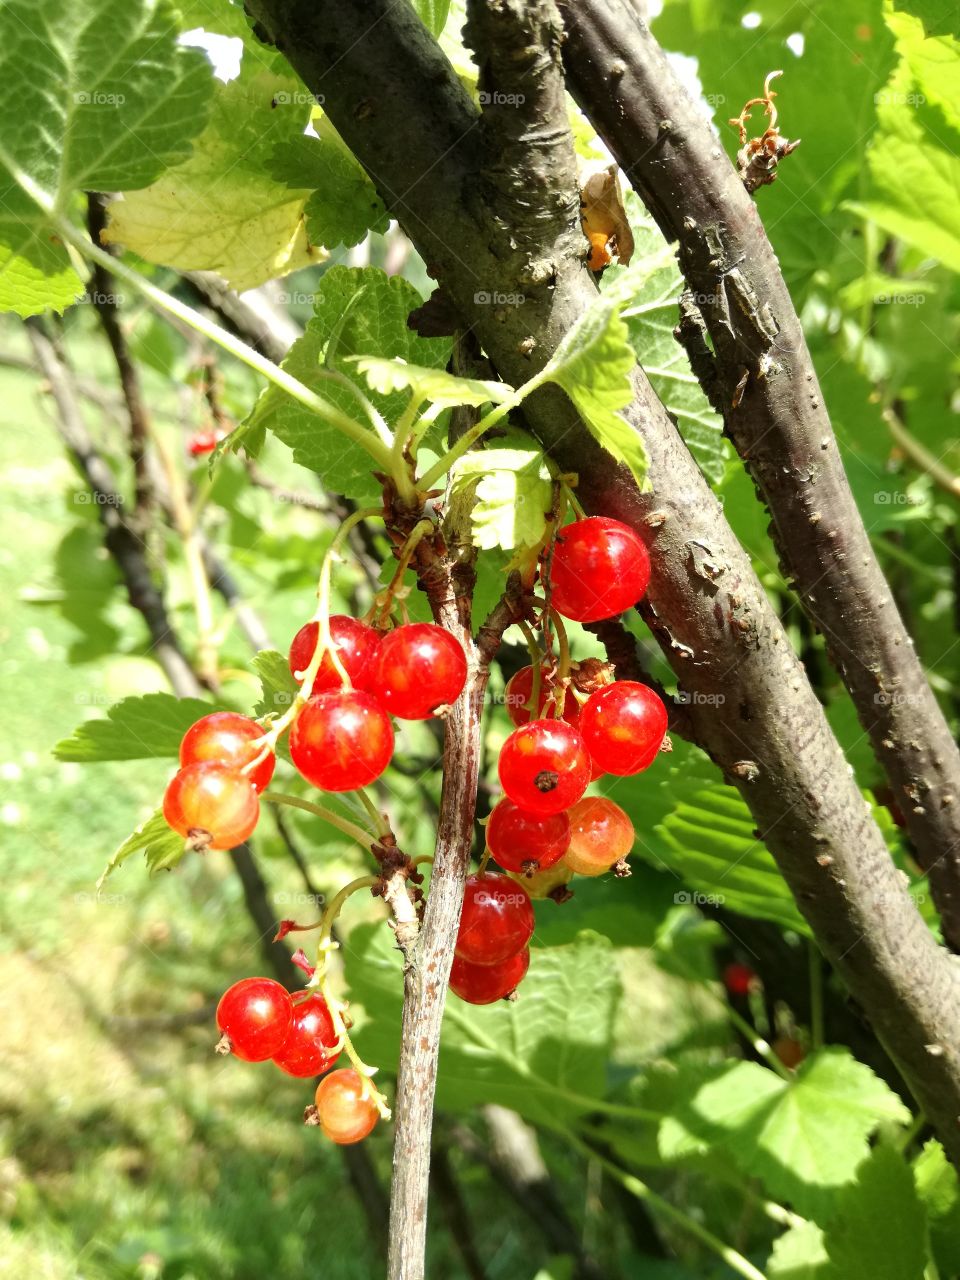 Colorful berries - redcurrant